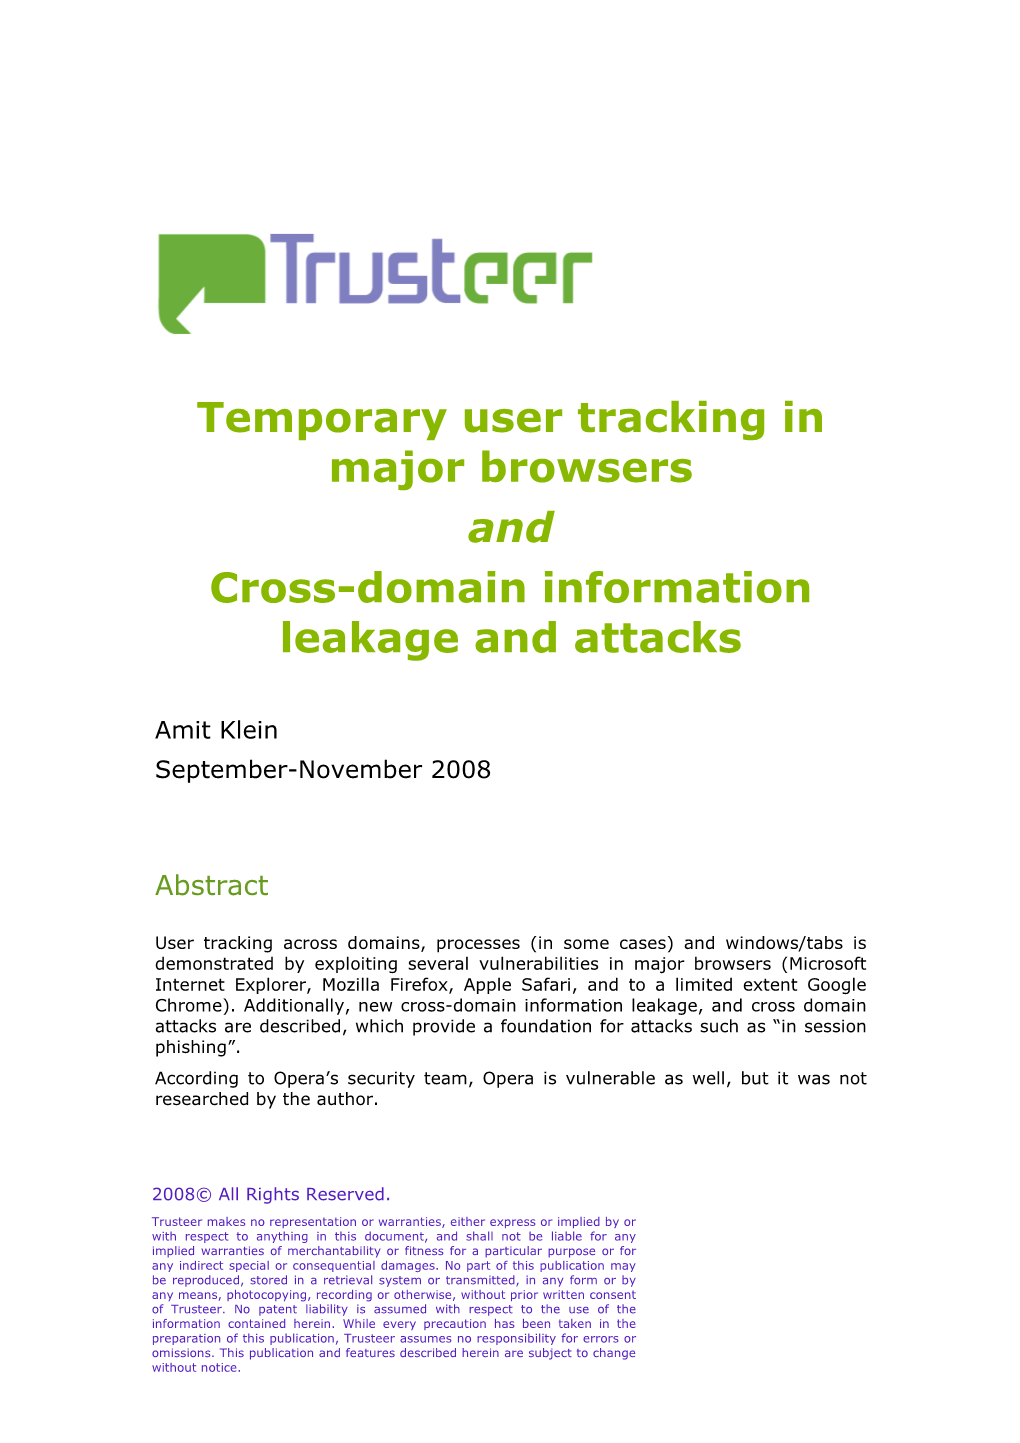 Temporary User Tracking in Major Browsers and Cross-Domain Information Leakage and Attacks